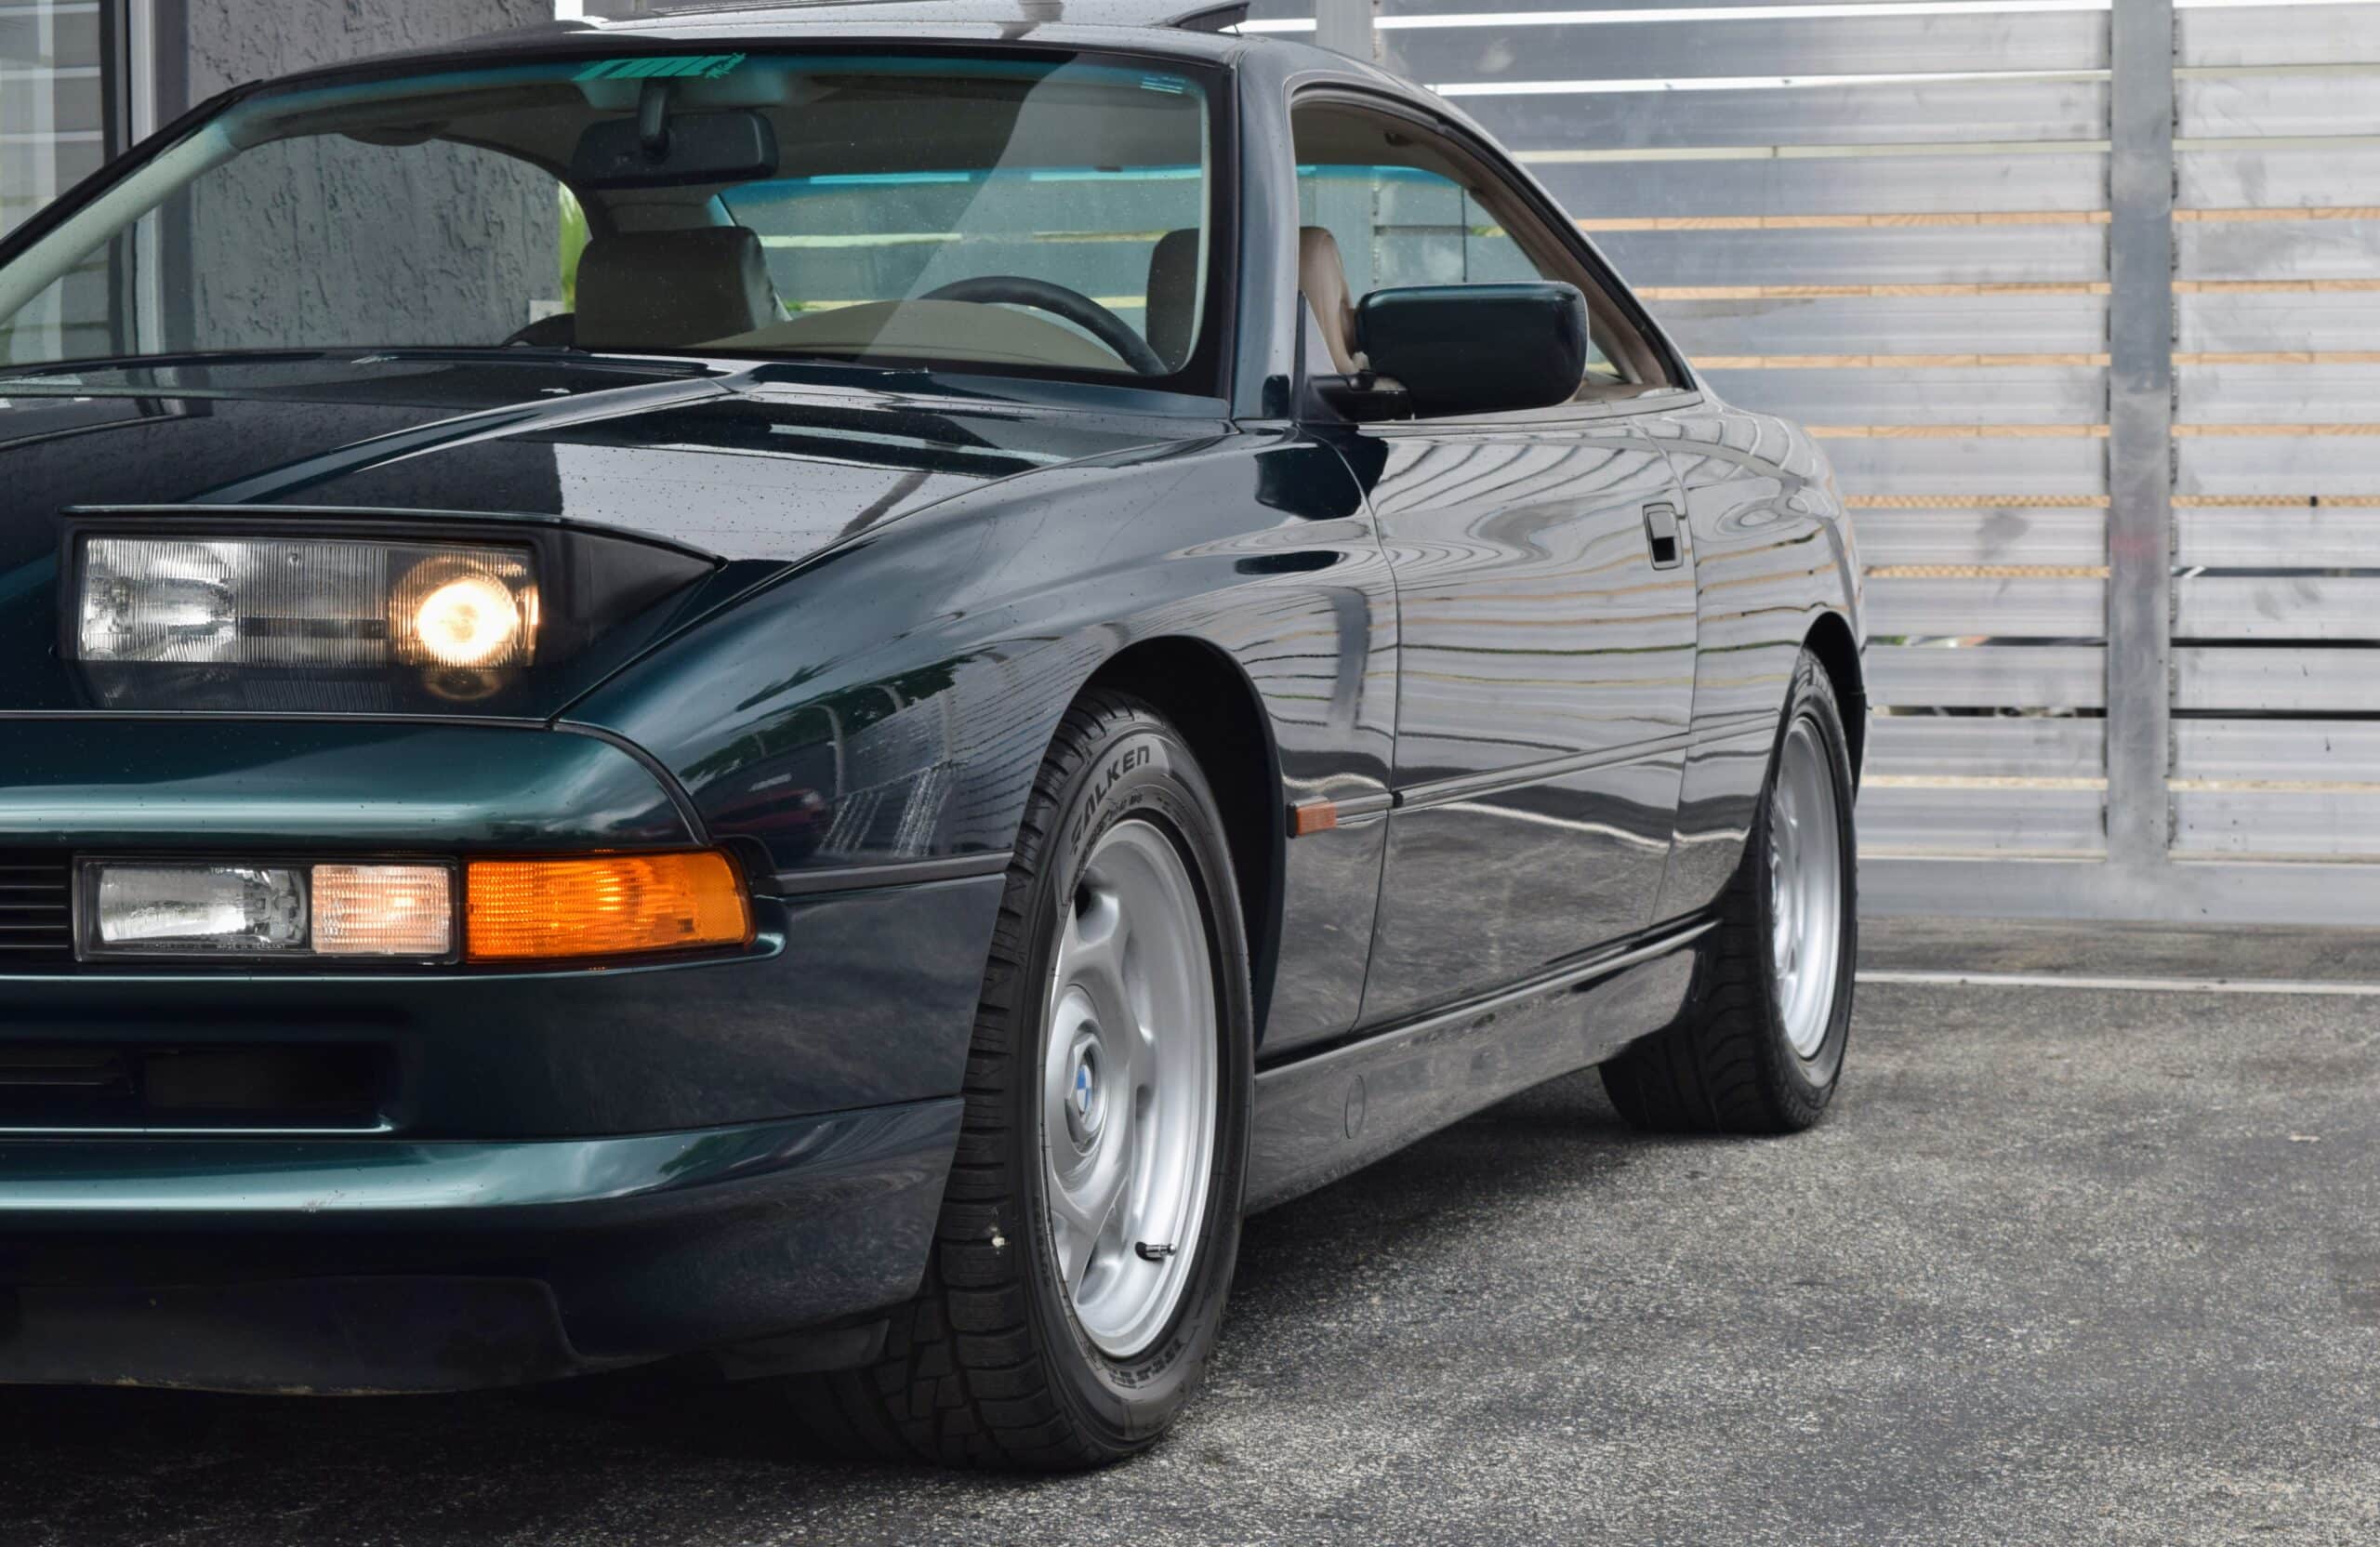 1997 BMW 8-Series Last Year 840 – Rare Oxford Green – Only 2 Owners – CALIFORNIA CAR SINCE NEW